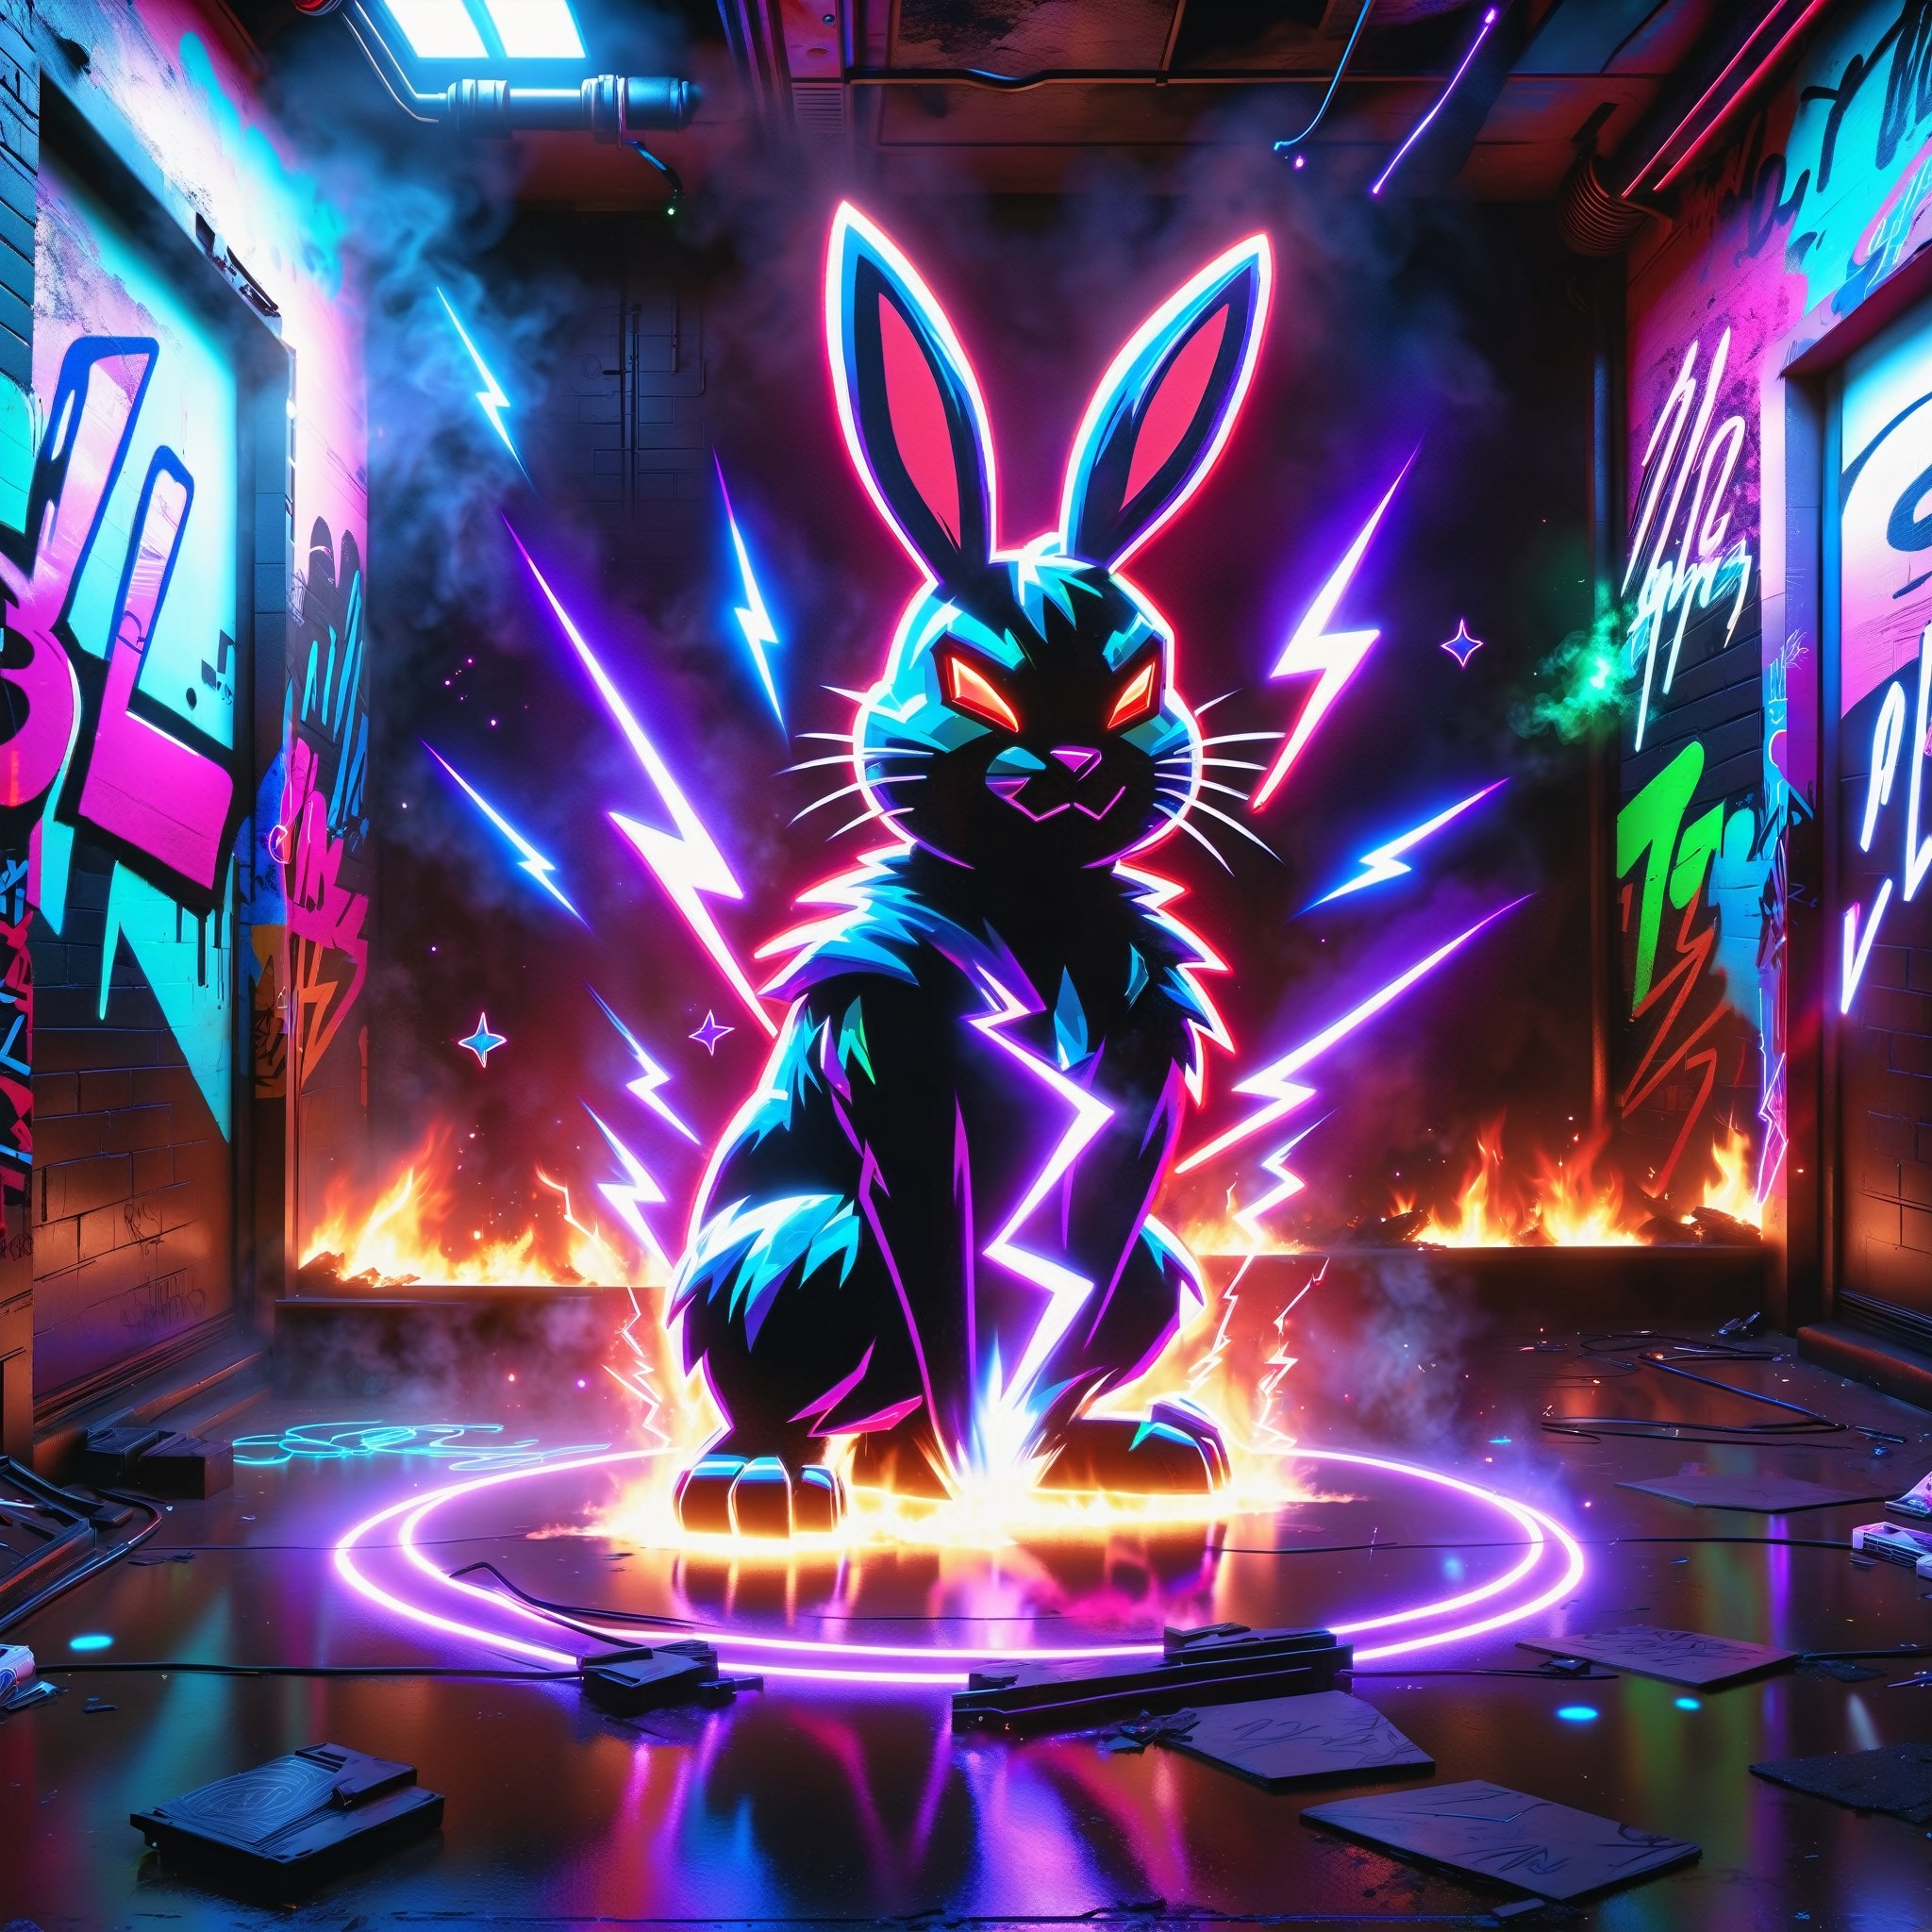 "Bad Bunny" in neon red, black, metallic, purple, blue, Pink, neon, sparkles, Neon colored smoke, planet, graffiti background,
,composed of elements of Fire thunder Lightning Electricity Space stars and neon lights, Cyberpunk,DonMH010D15pl4yXL 